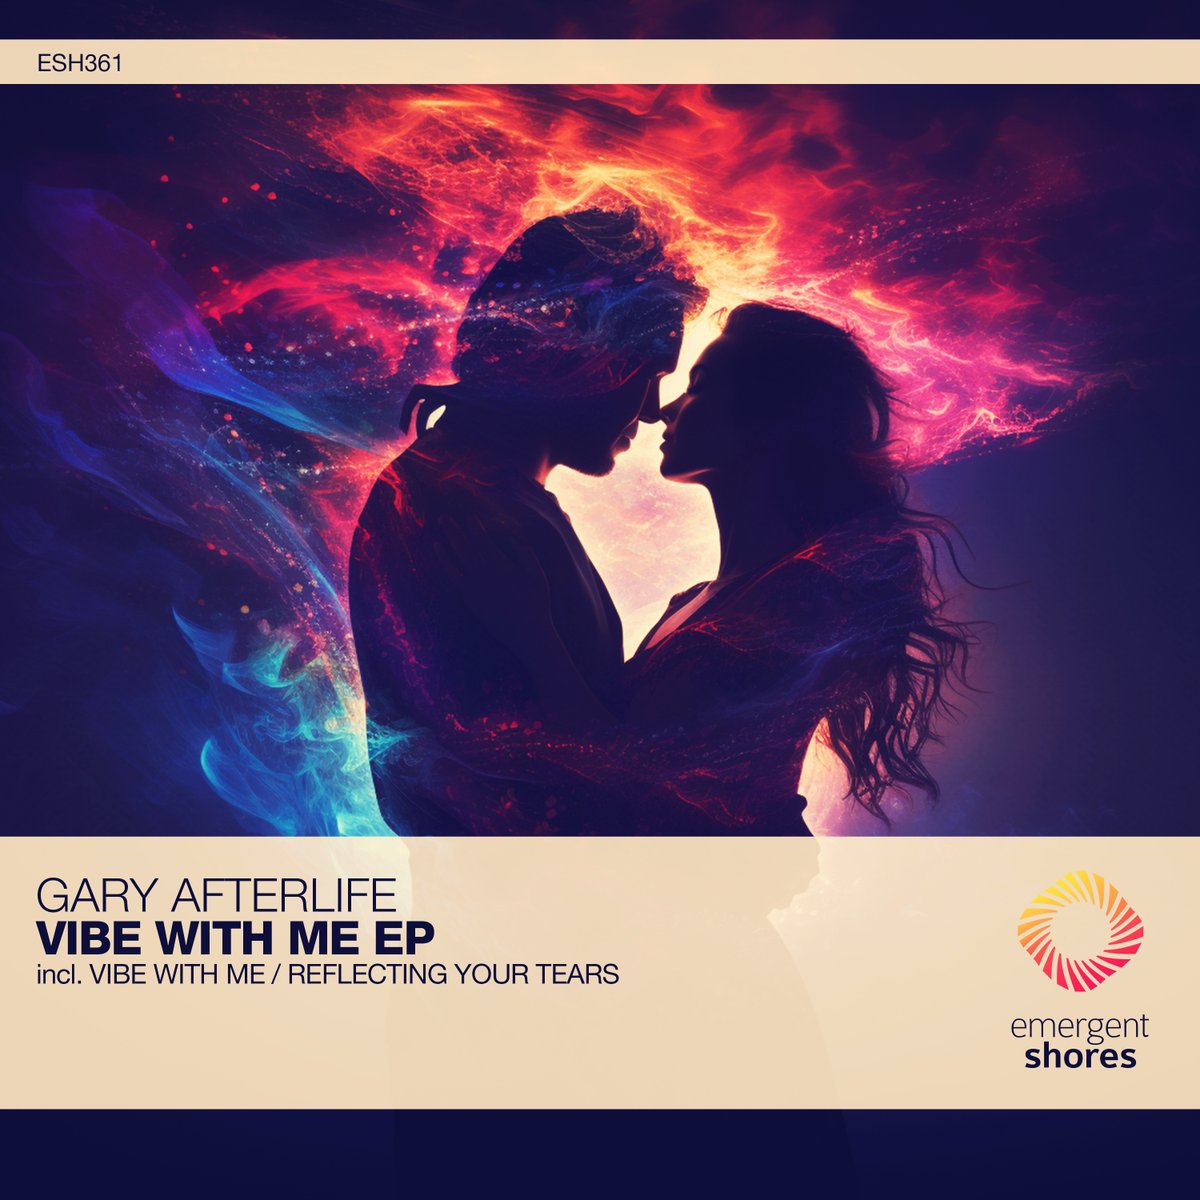 #SummerMelodies October 2023 | Live on di.fm/melodicprogres… 13. Gary Afterlife - Vibe With Me [Emergent Shores] @GaryAfterlife @Emergent_music #MeloProg #ProgressiveHouse #ProgHouse